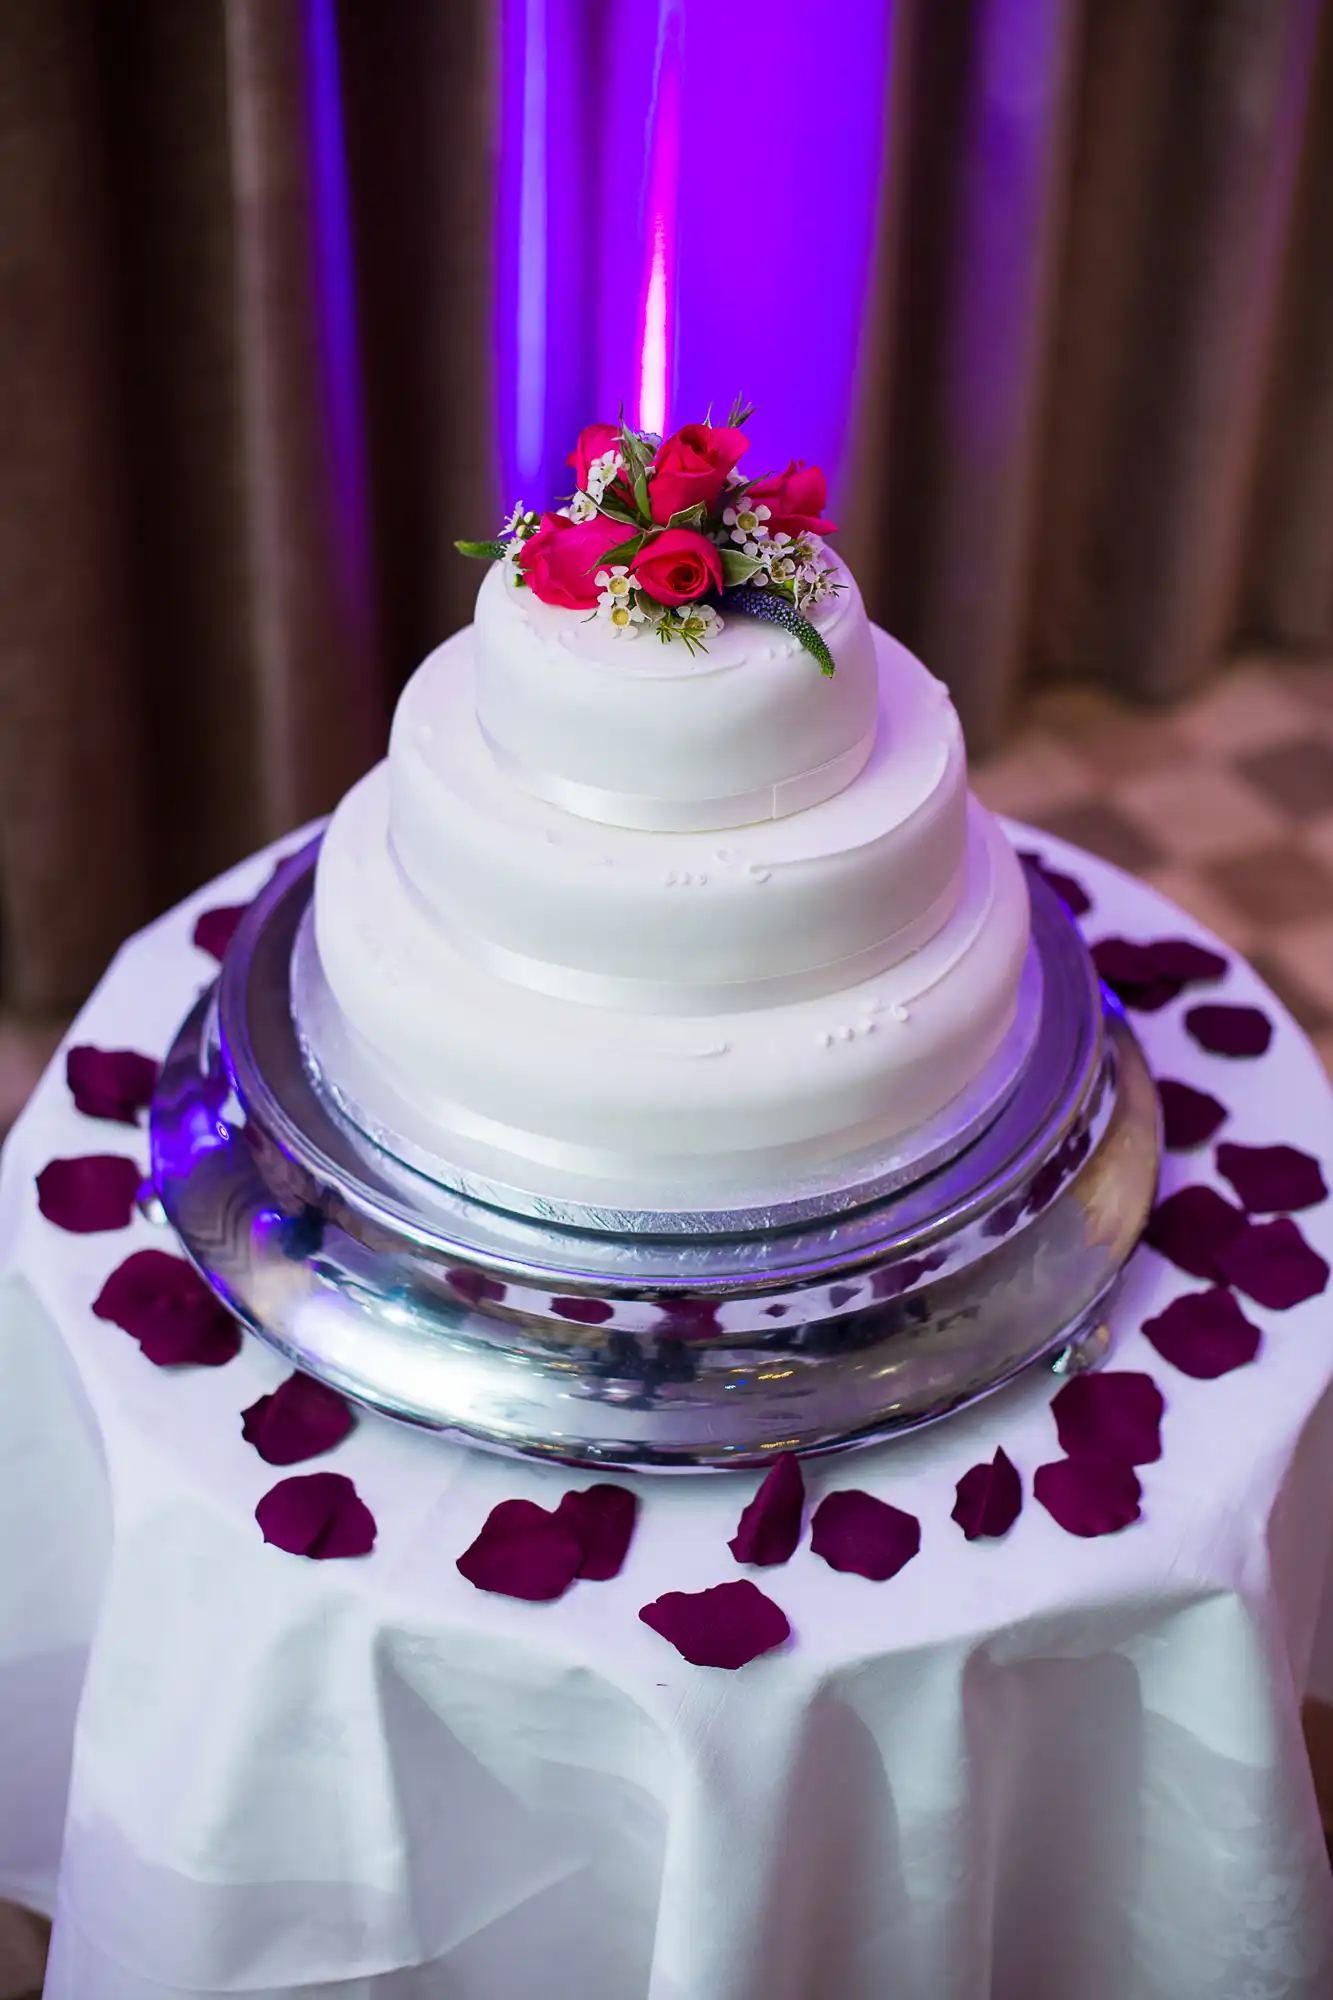 A three-tiered wedding cake with white icing, decorated with red flowers, displayed on a silver stand surrounded by rose petals, lit by a purple light.